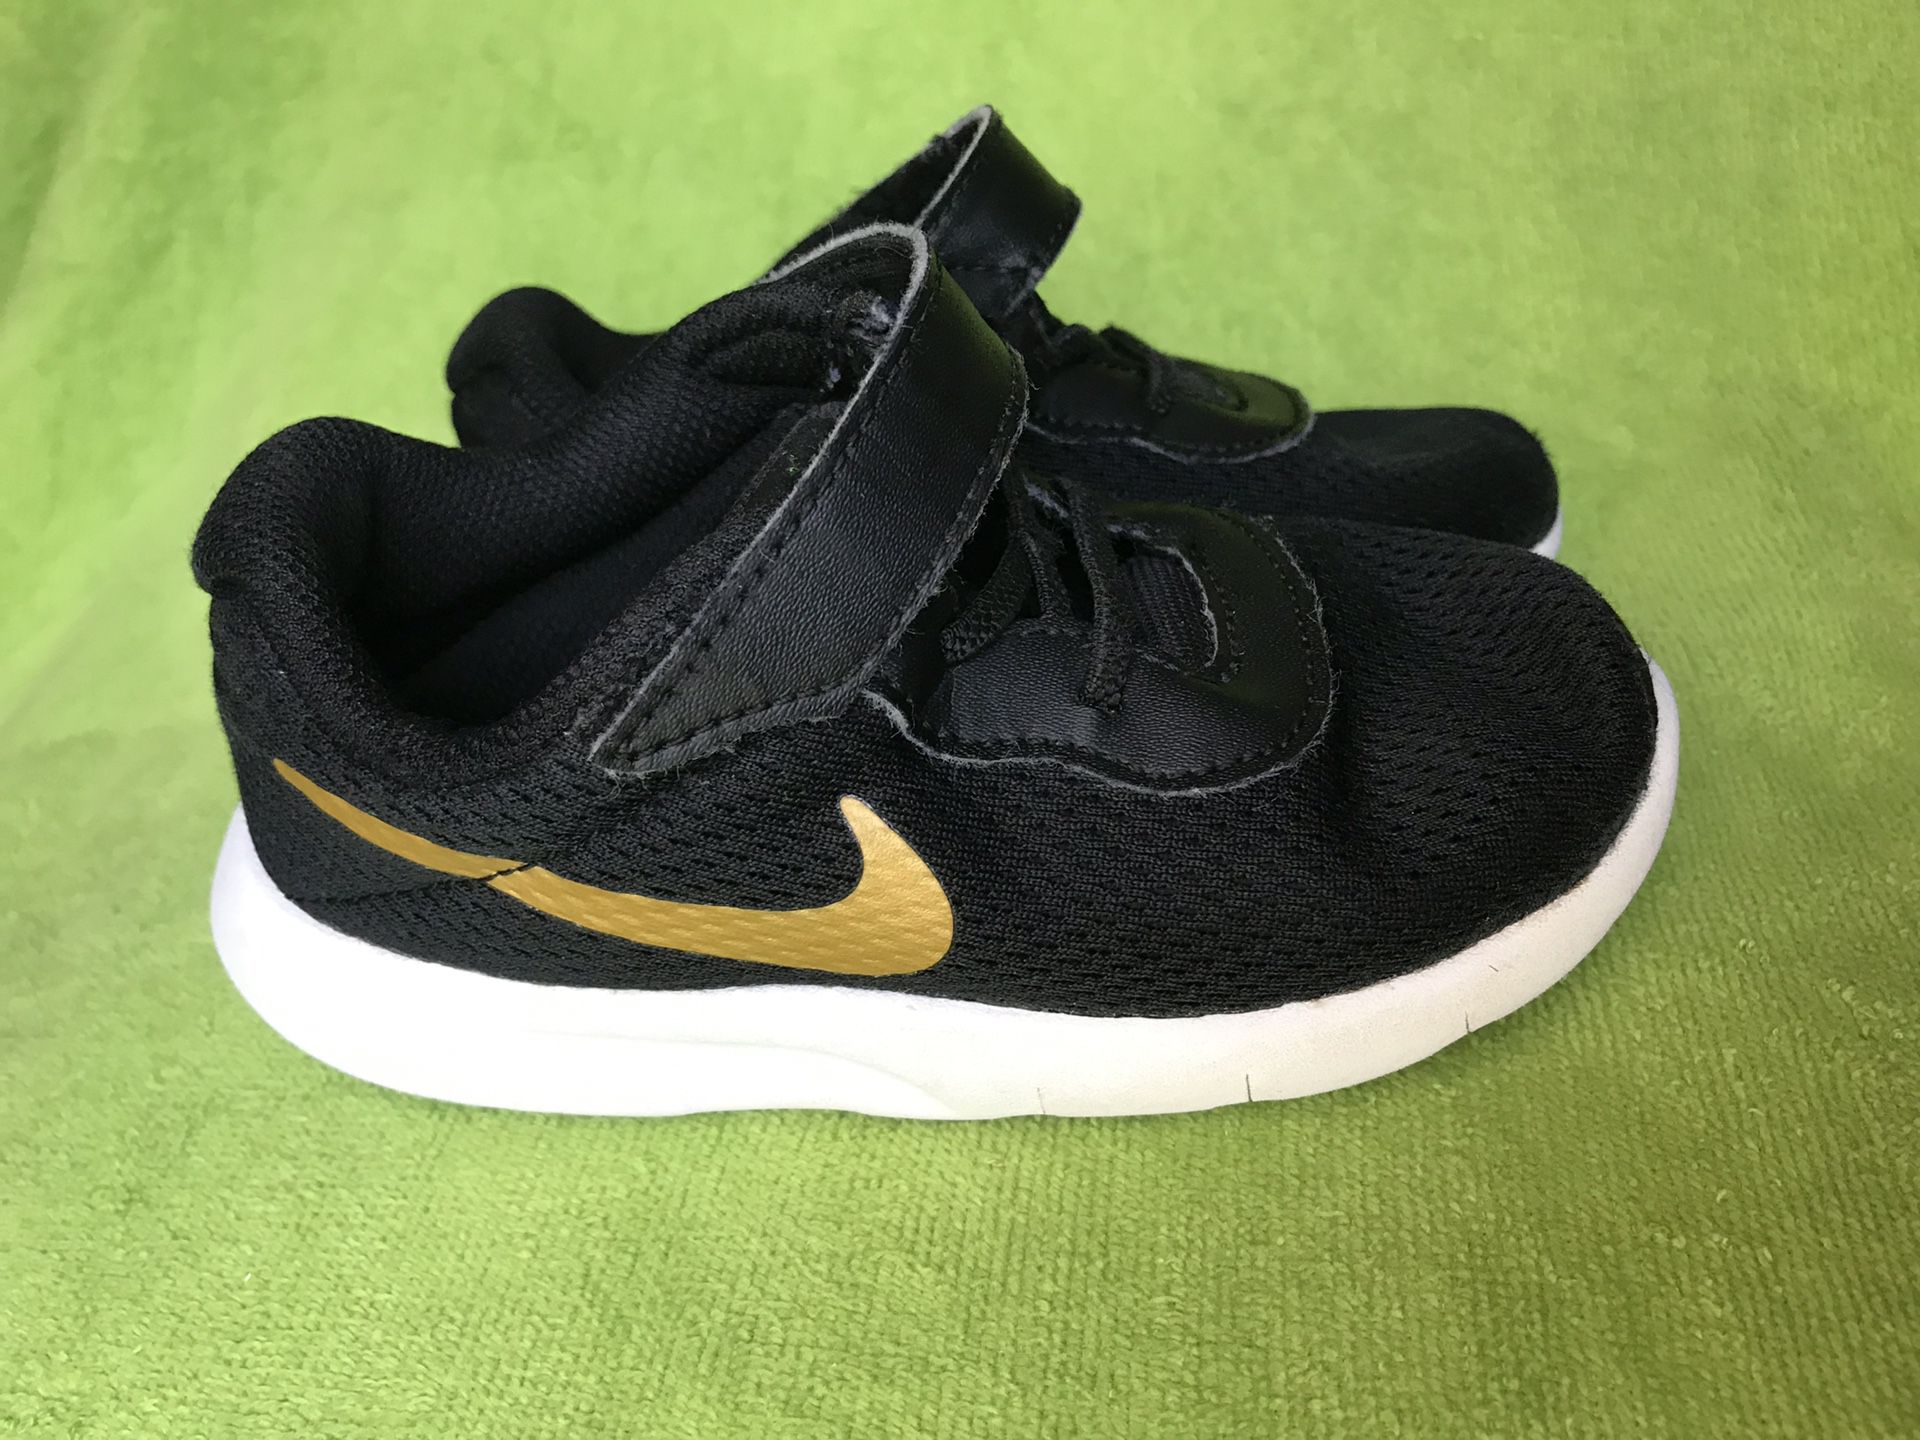 NIKE SIZE US 8C- Used as new